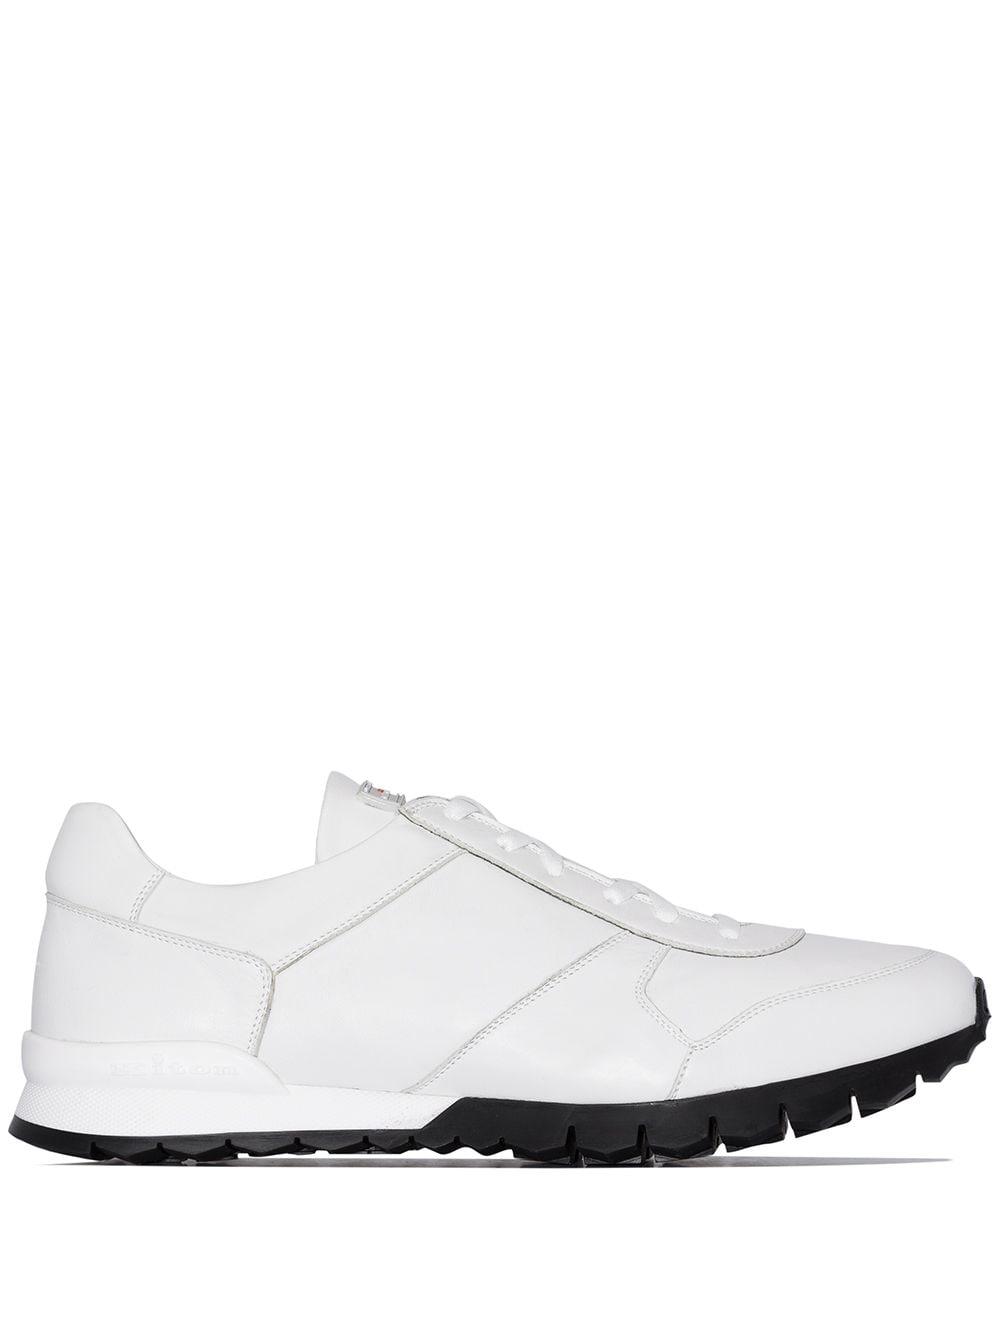 Kiton Leather Contrast Sole Classic Sneakers in White for Men - Lyst